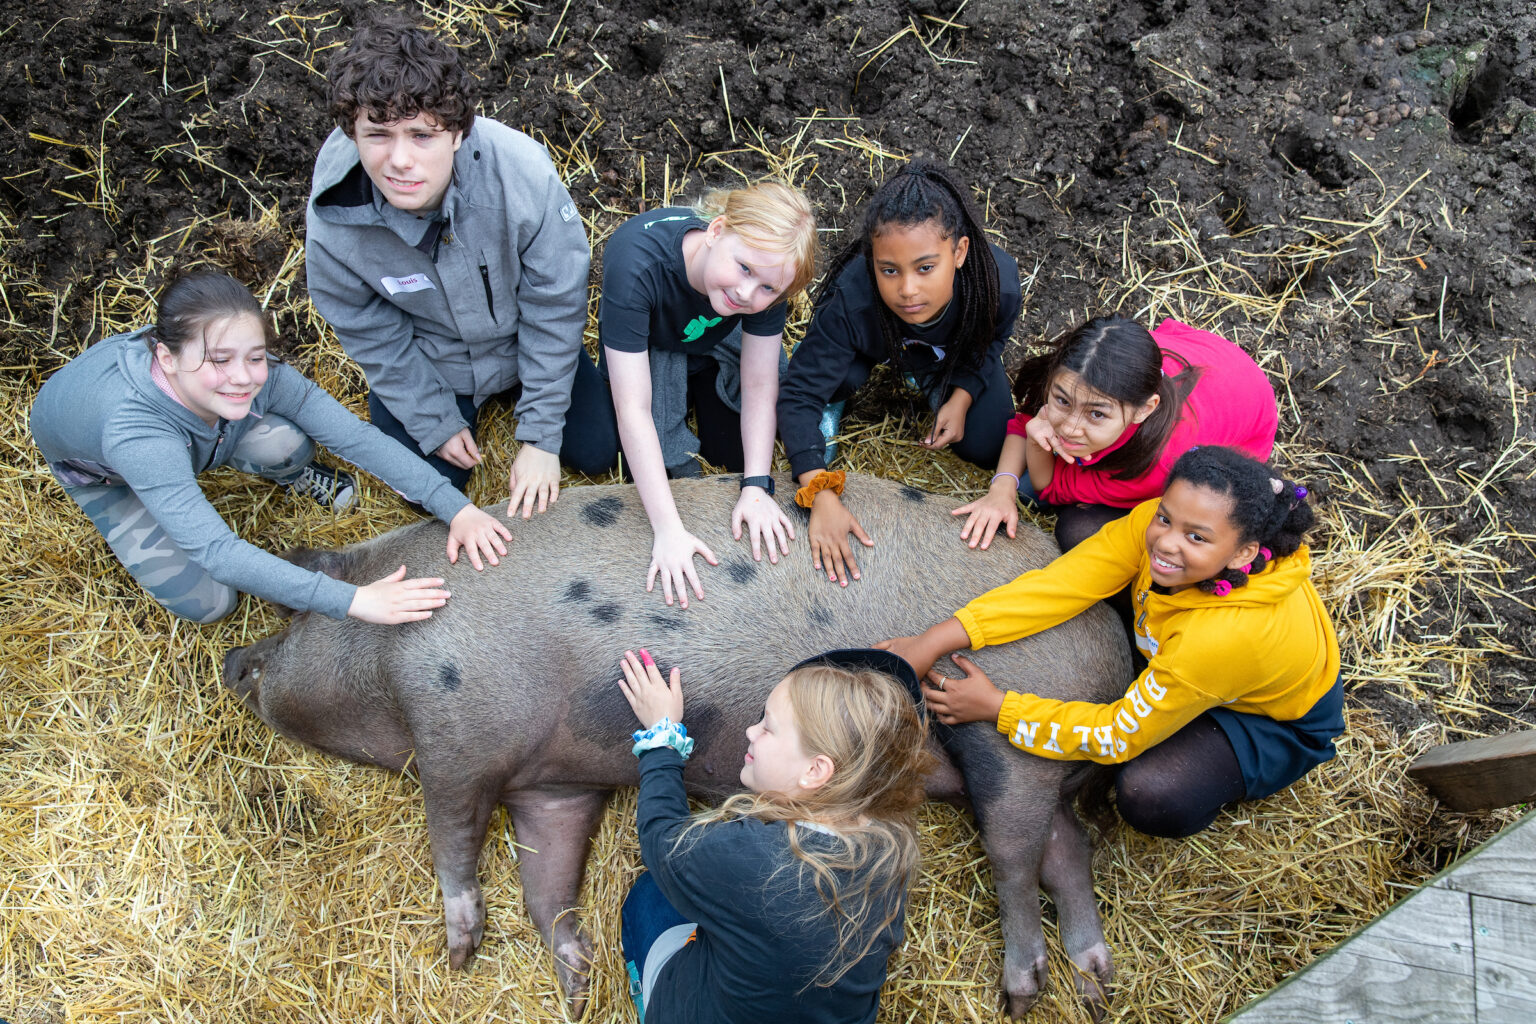 Group of children sitting around and touching a pig.